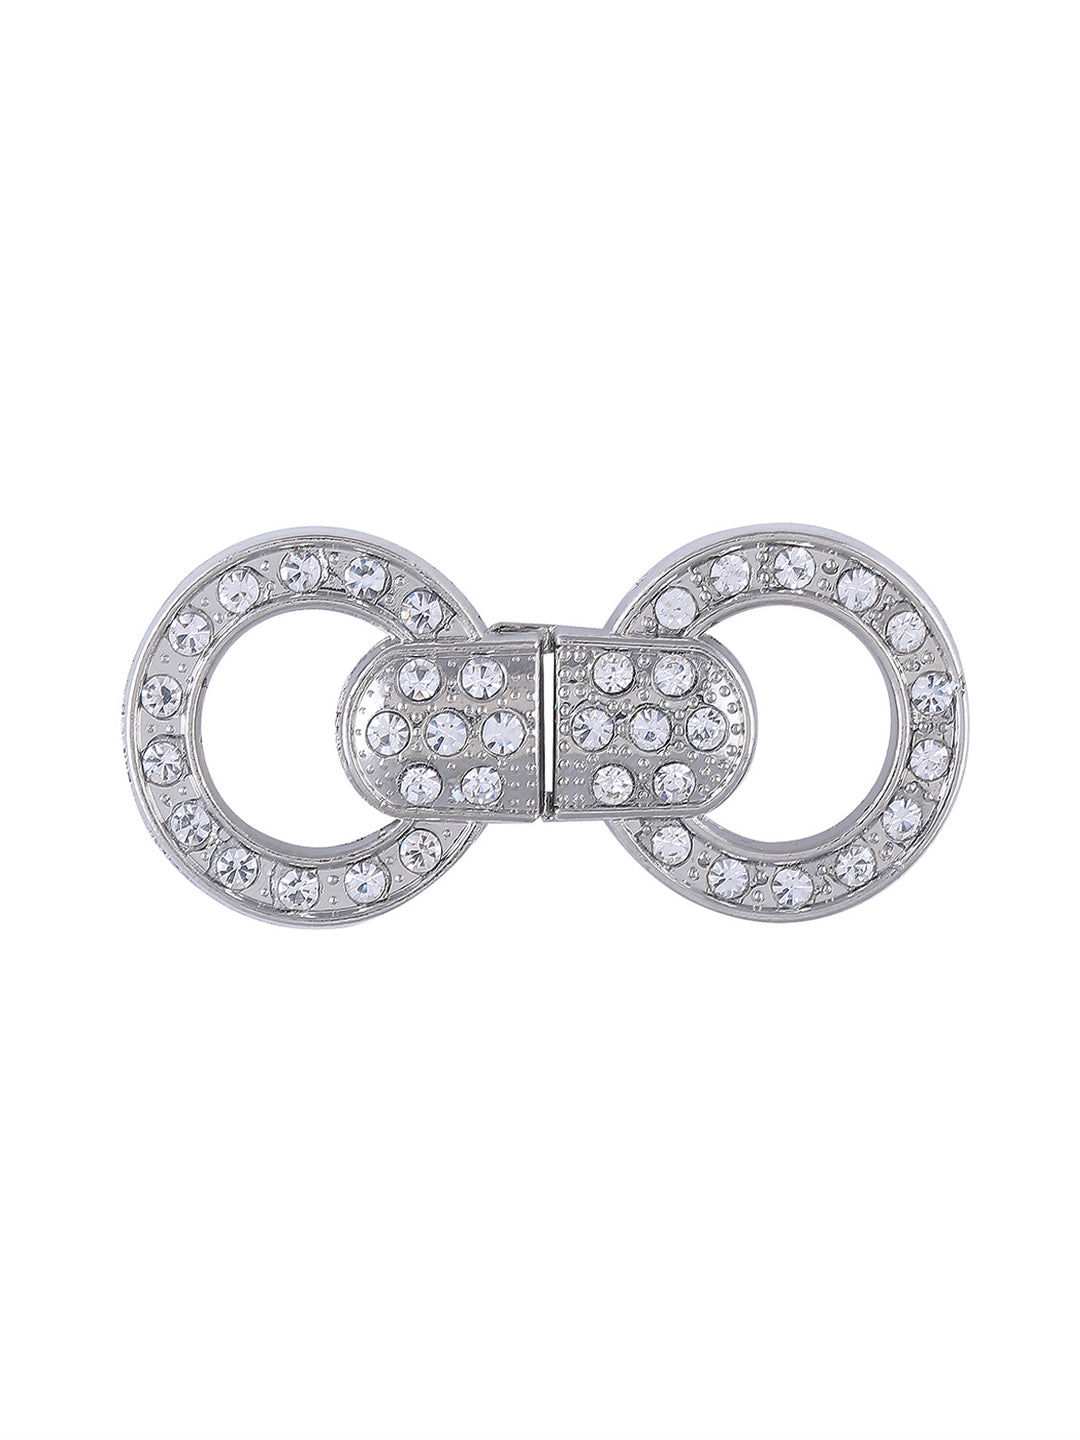 Sparkling Silver Crystal Closure Round Clasp Buckle